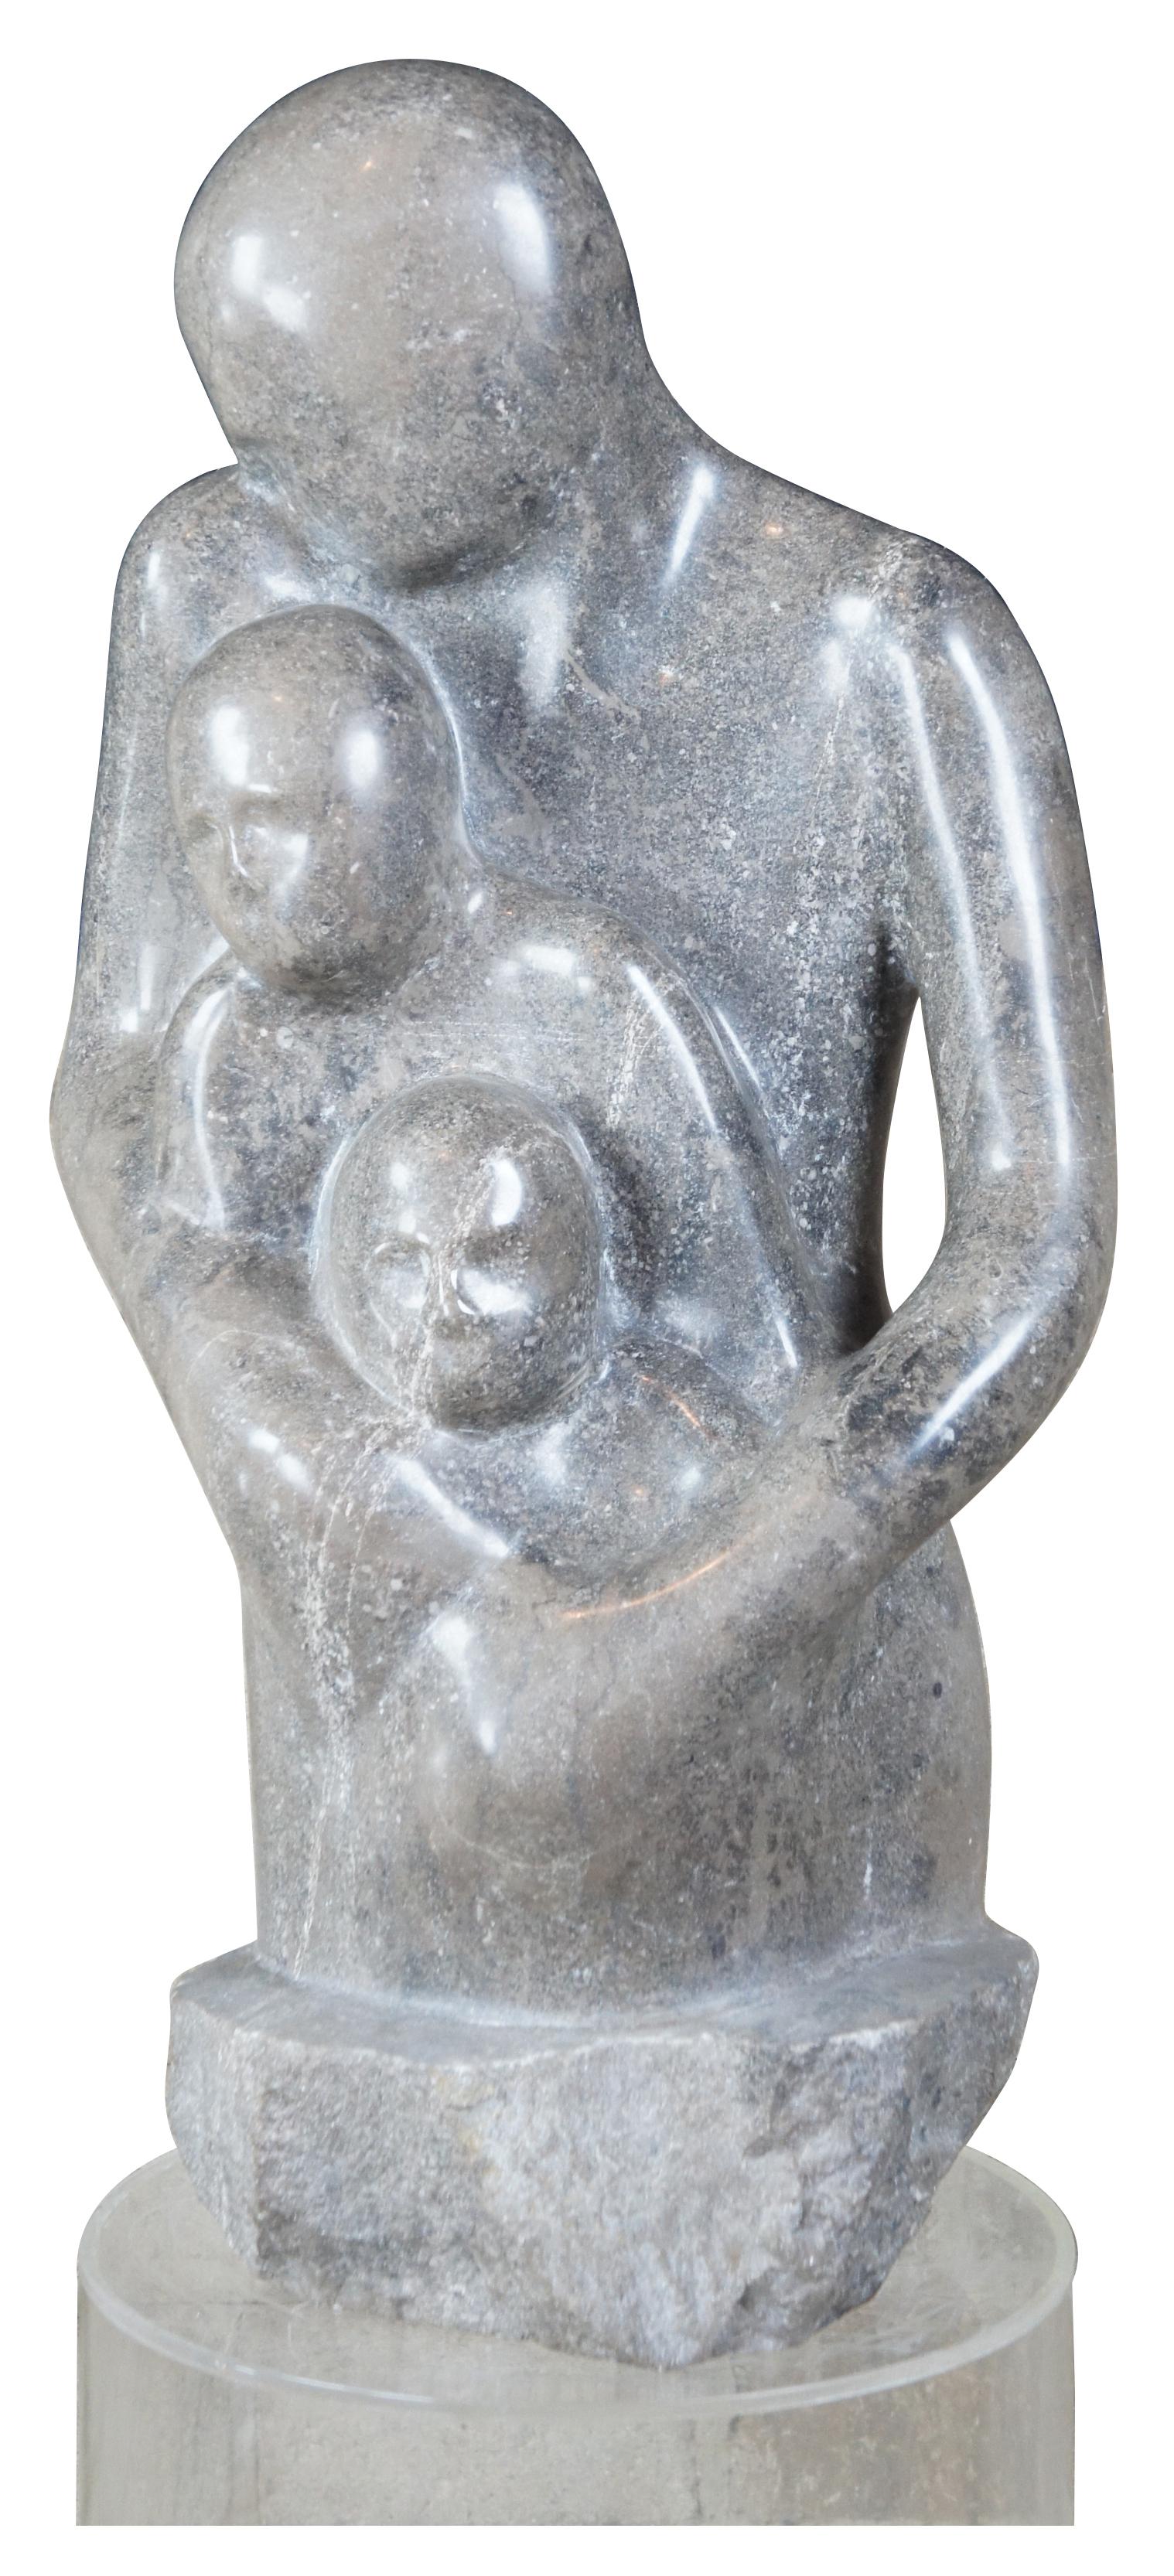 G Turner 1978 marble sculpture with Lucite base. Features a woman holding onto her children. Singed along the edge of base.

Measures: Sculpture 30